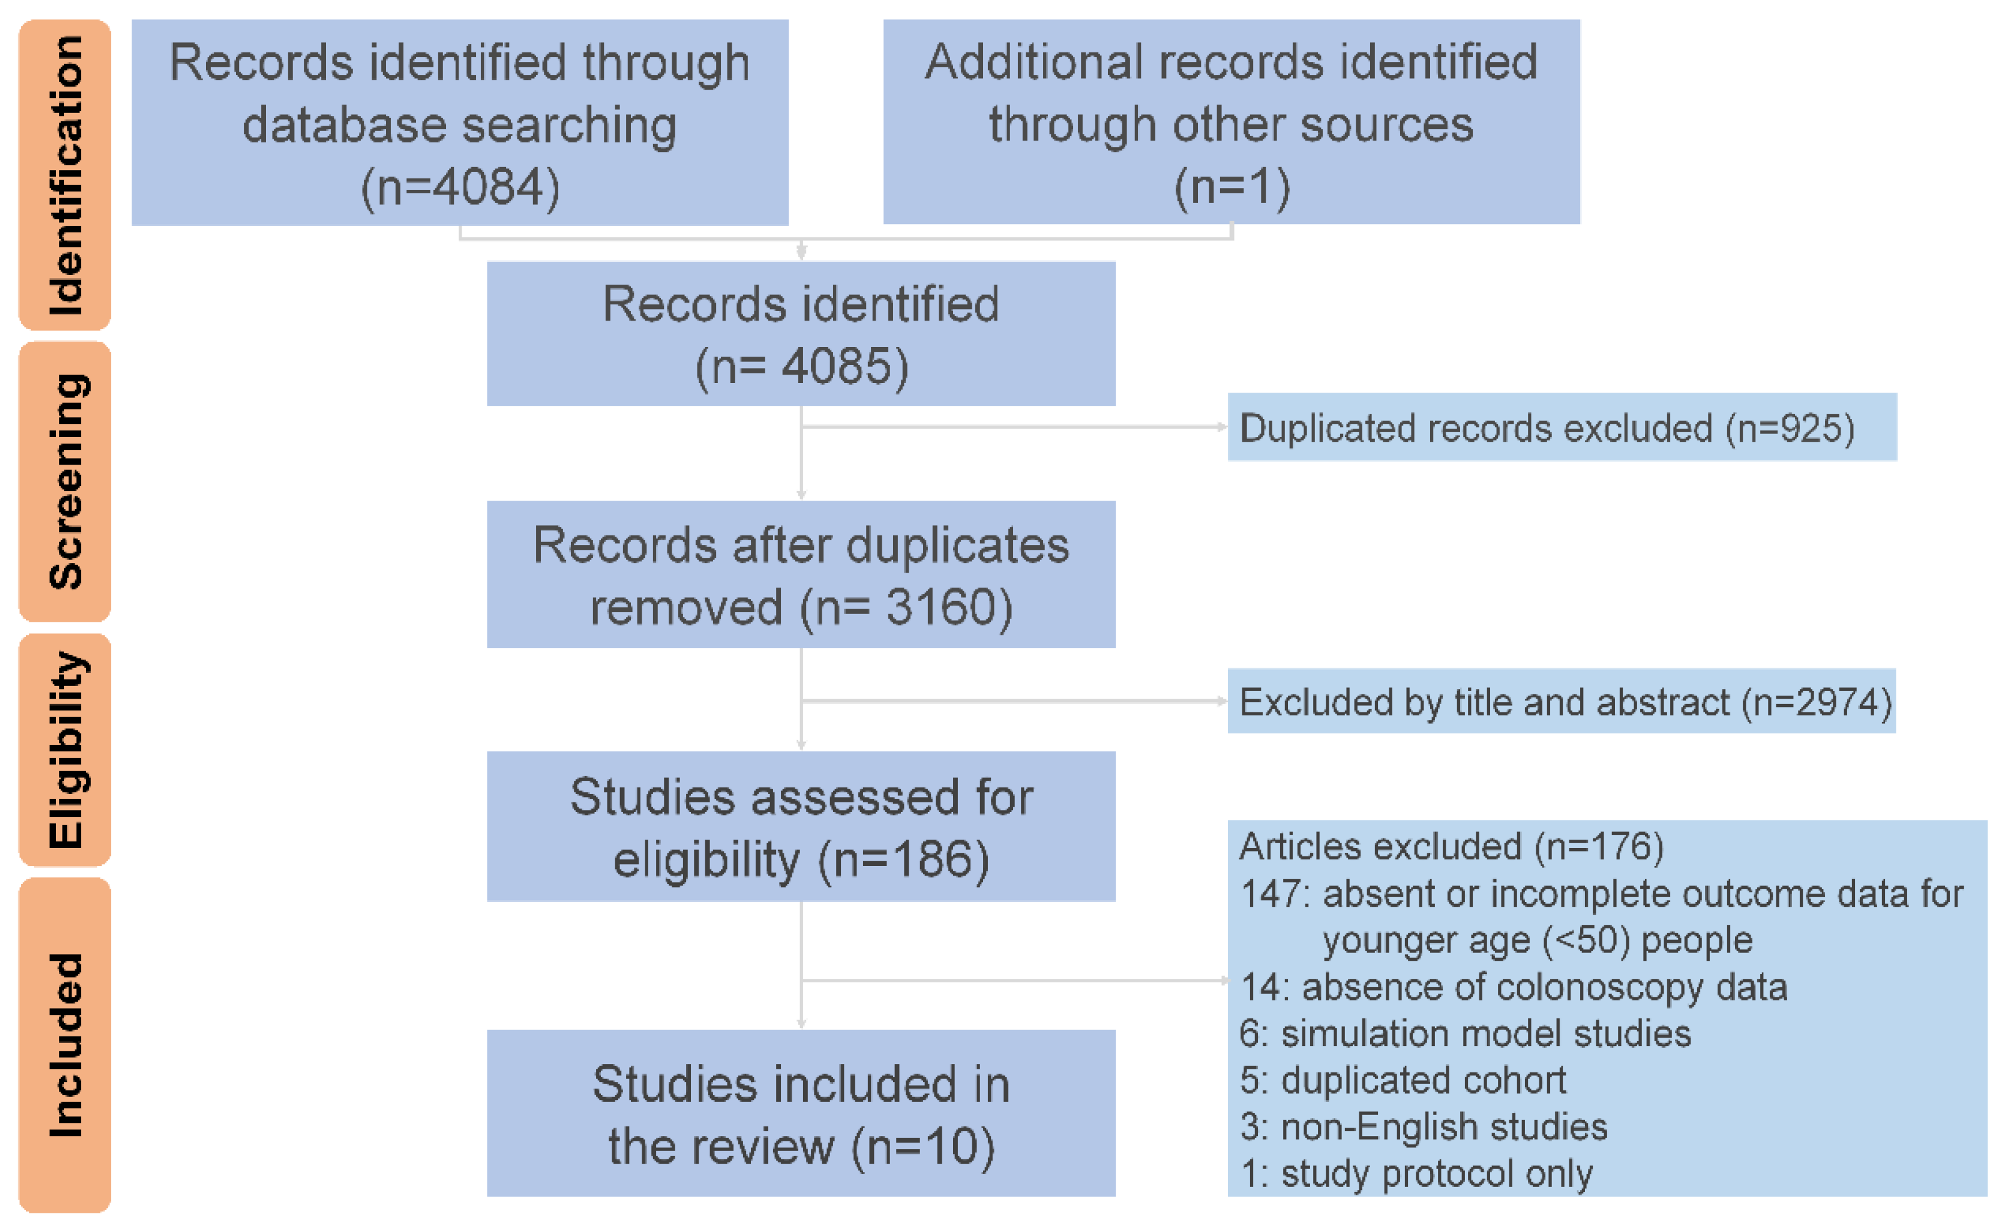 Preferred Reporting Items for Systematic Reviews and Meta-Analyses